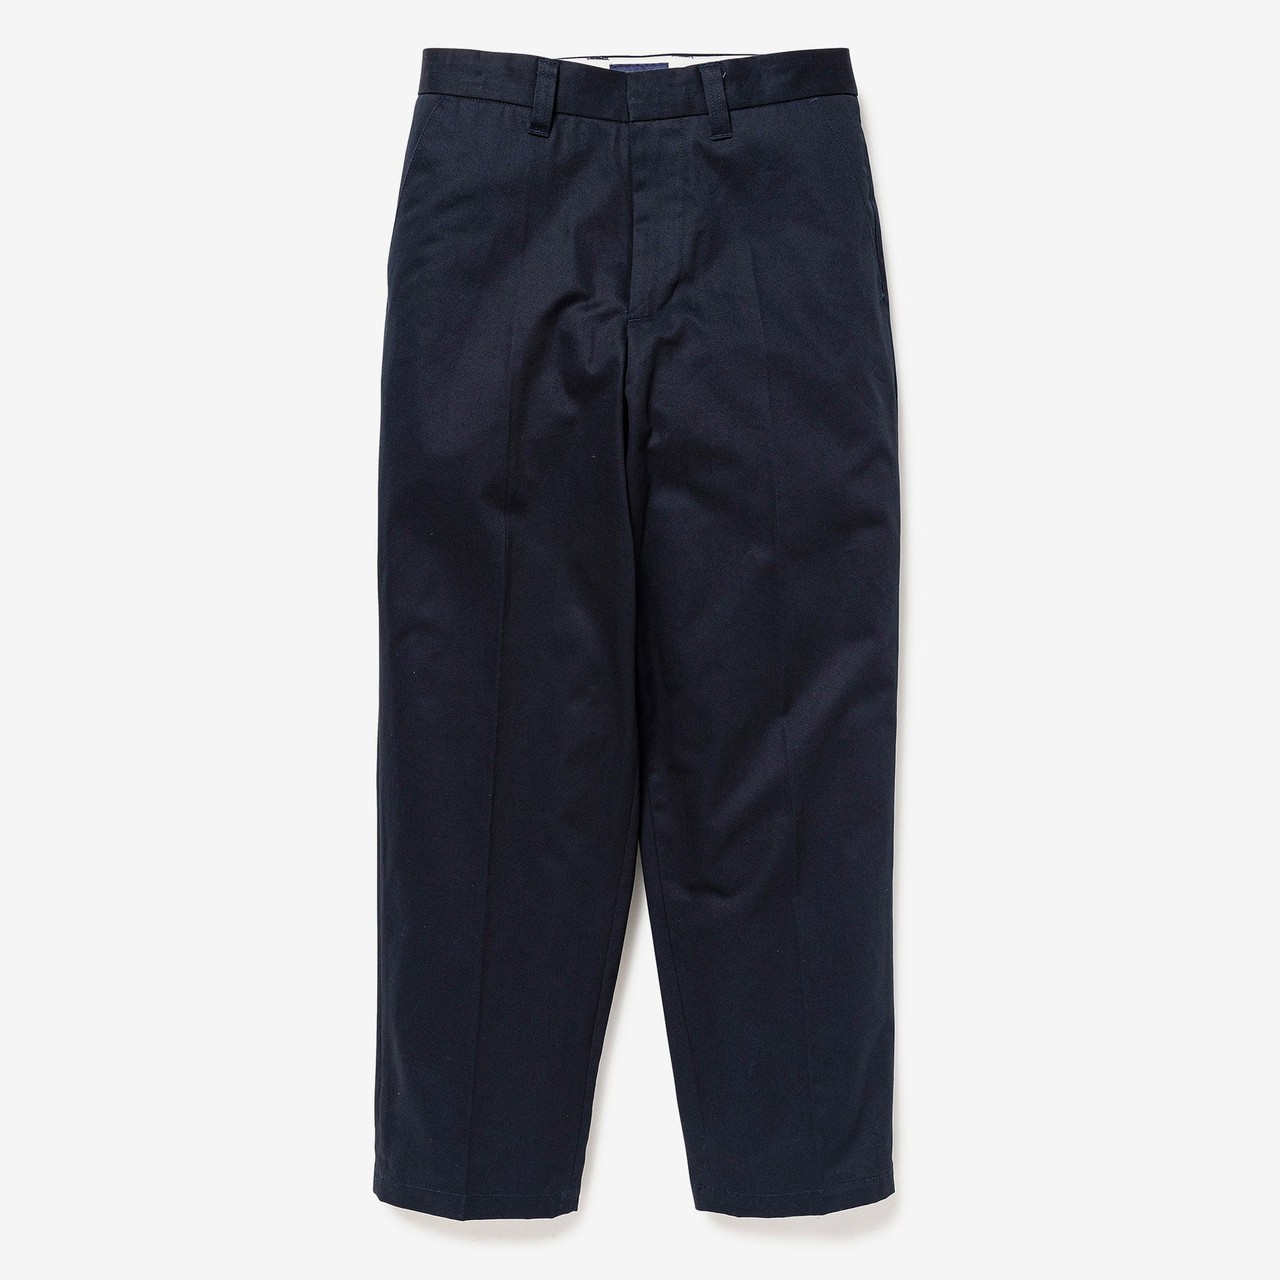 DESCENDANT PANTS DC-6 GDT TWILL TROUSERS Online Shop to Worldwide